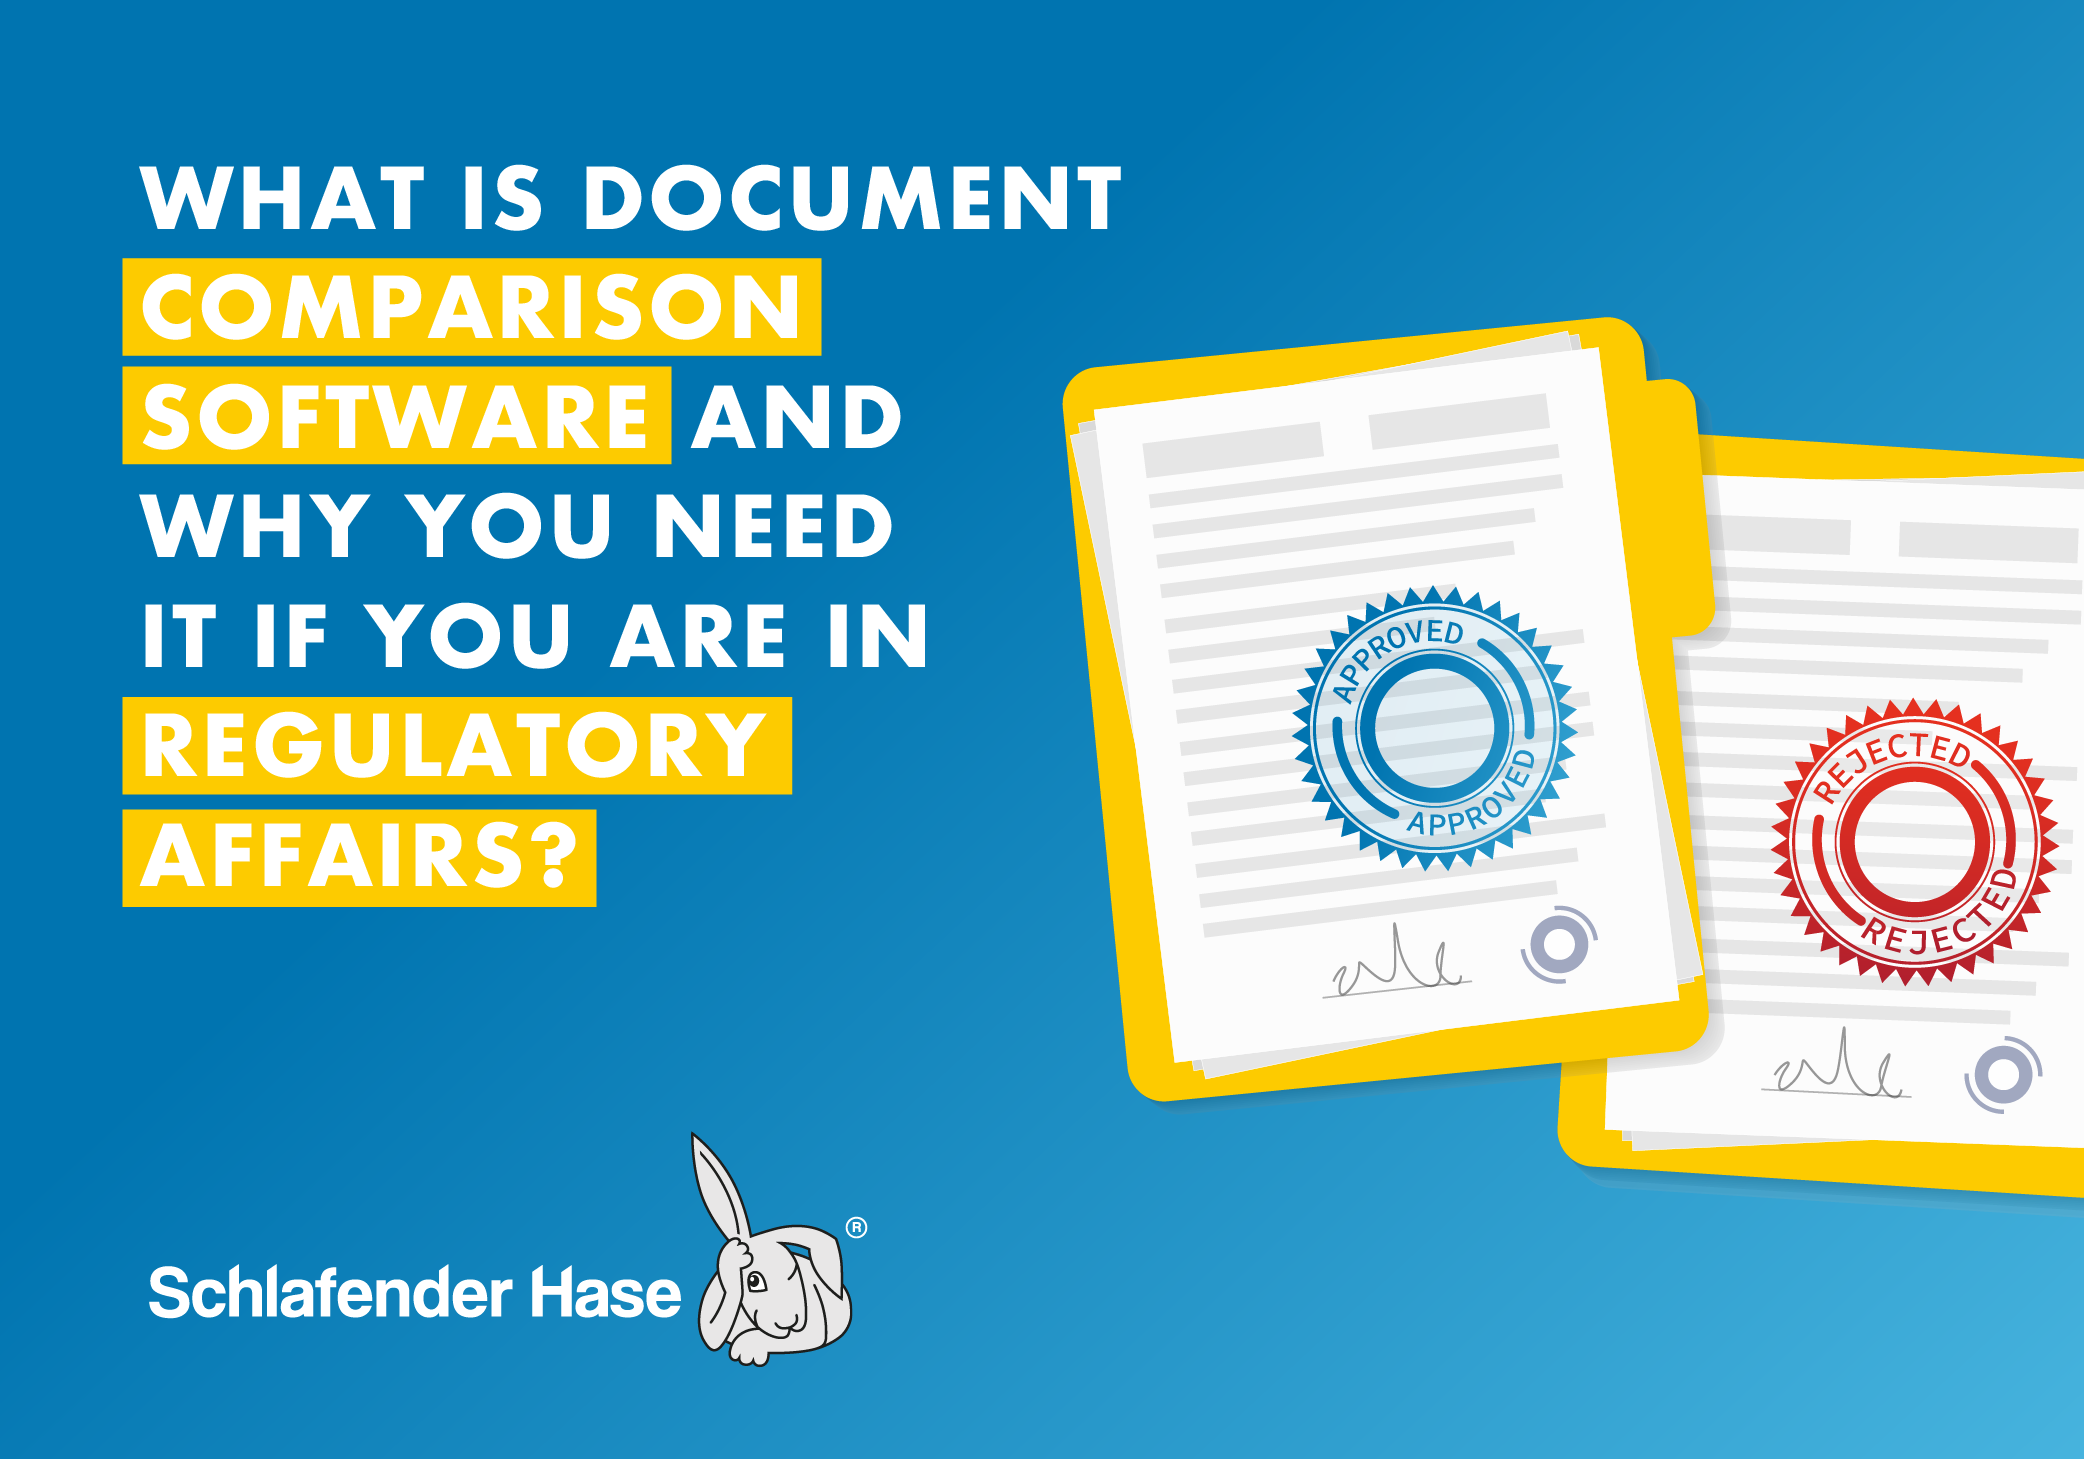 What is a document comparison software?